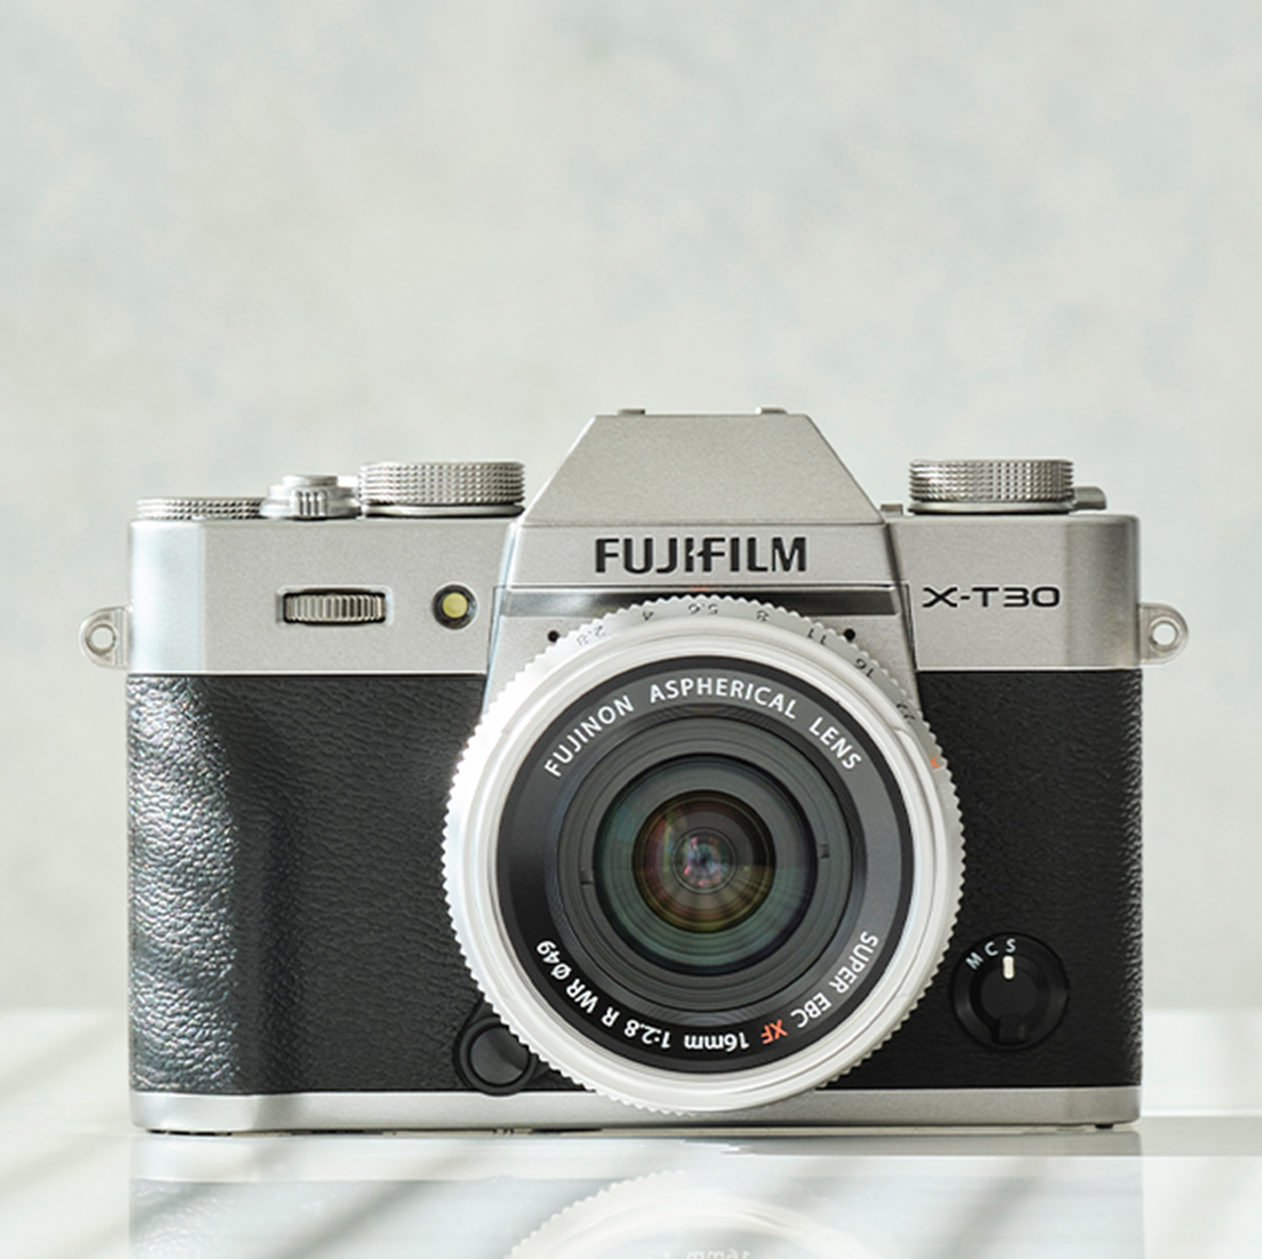 FujiFilm x-t30 camera with the lens facing the viewer